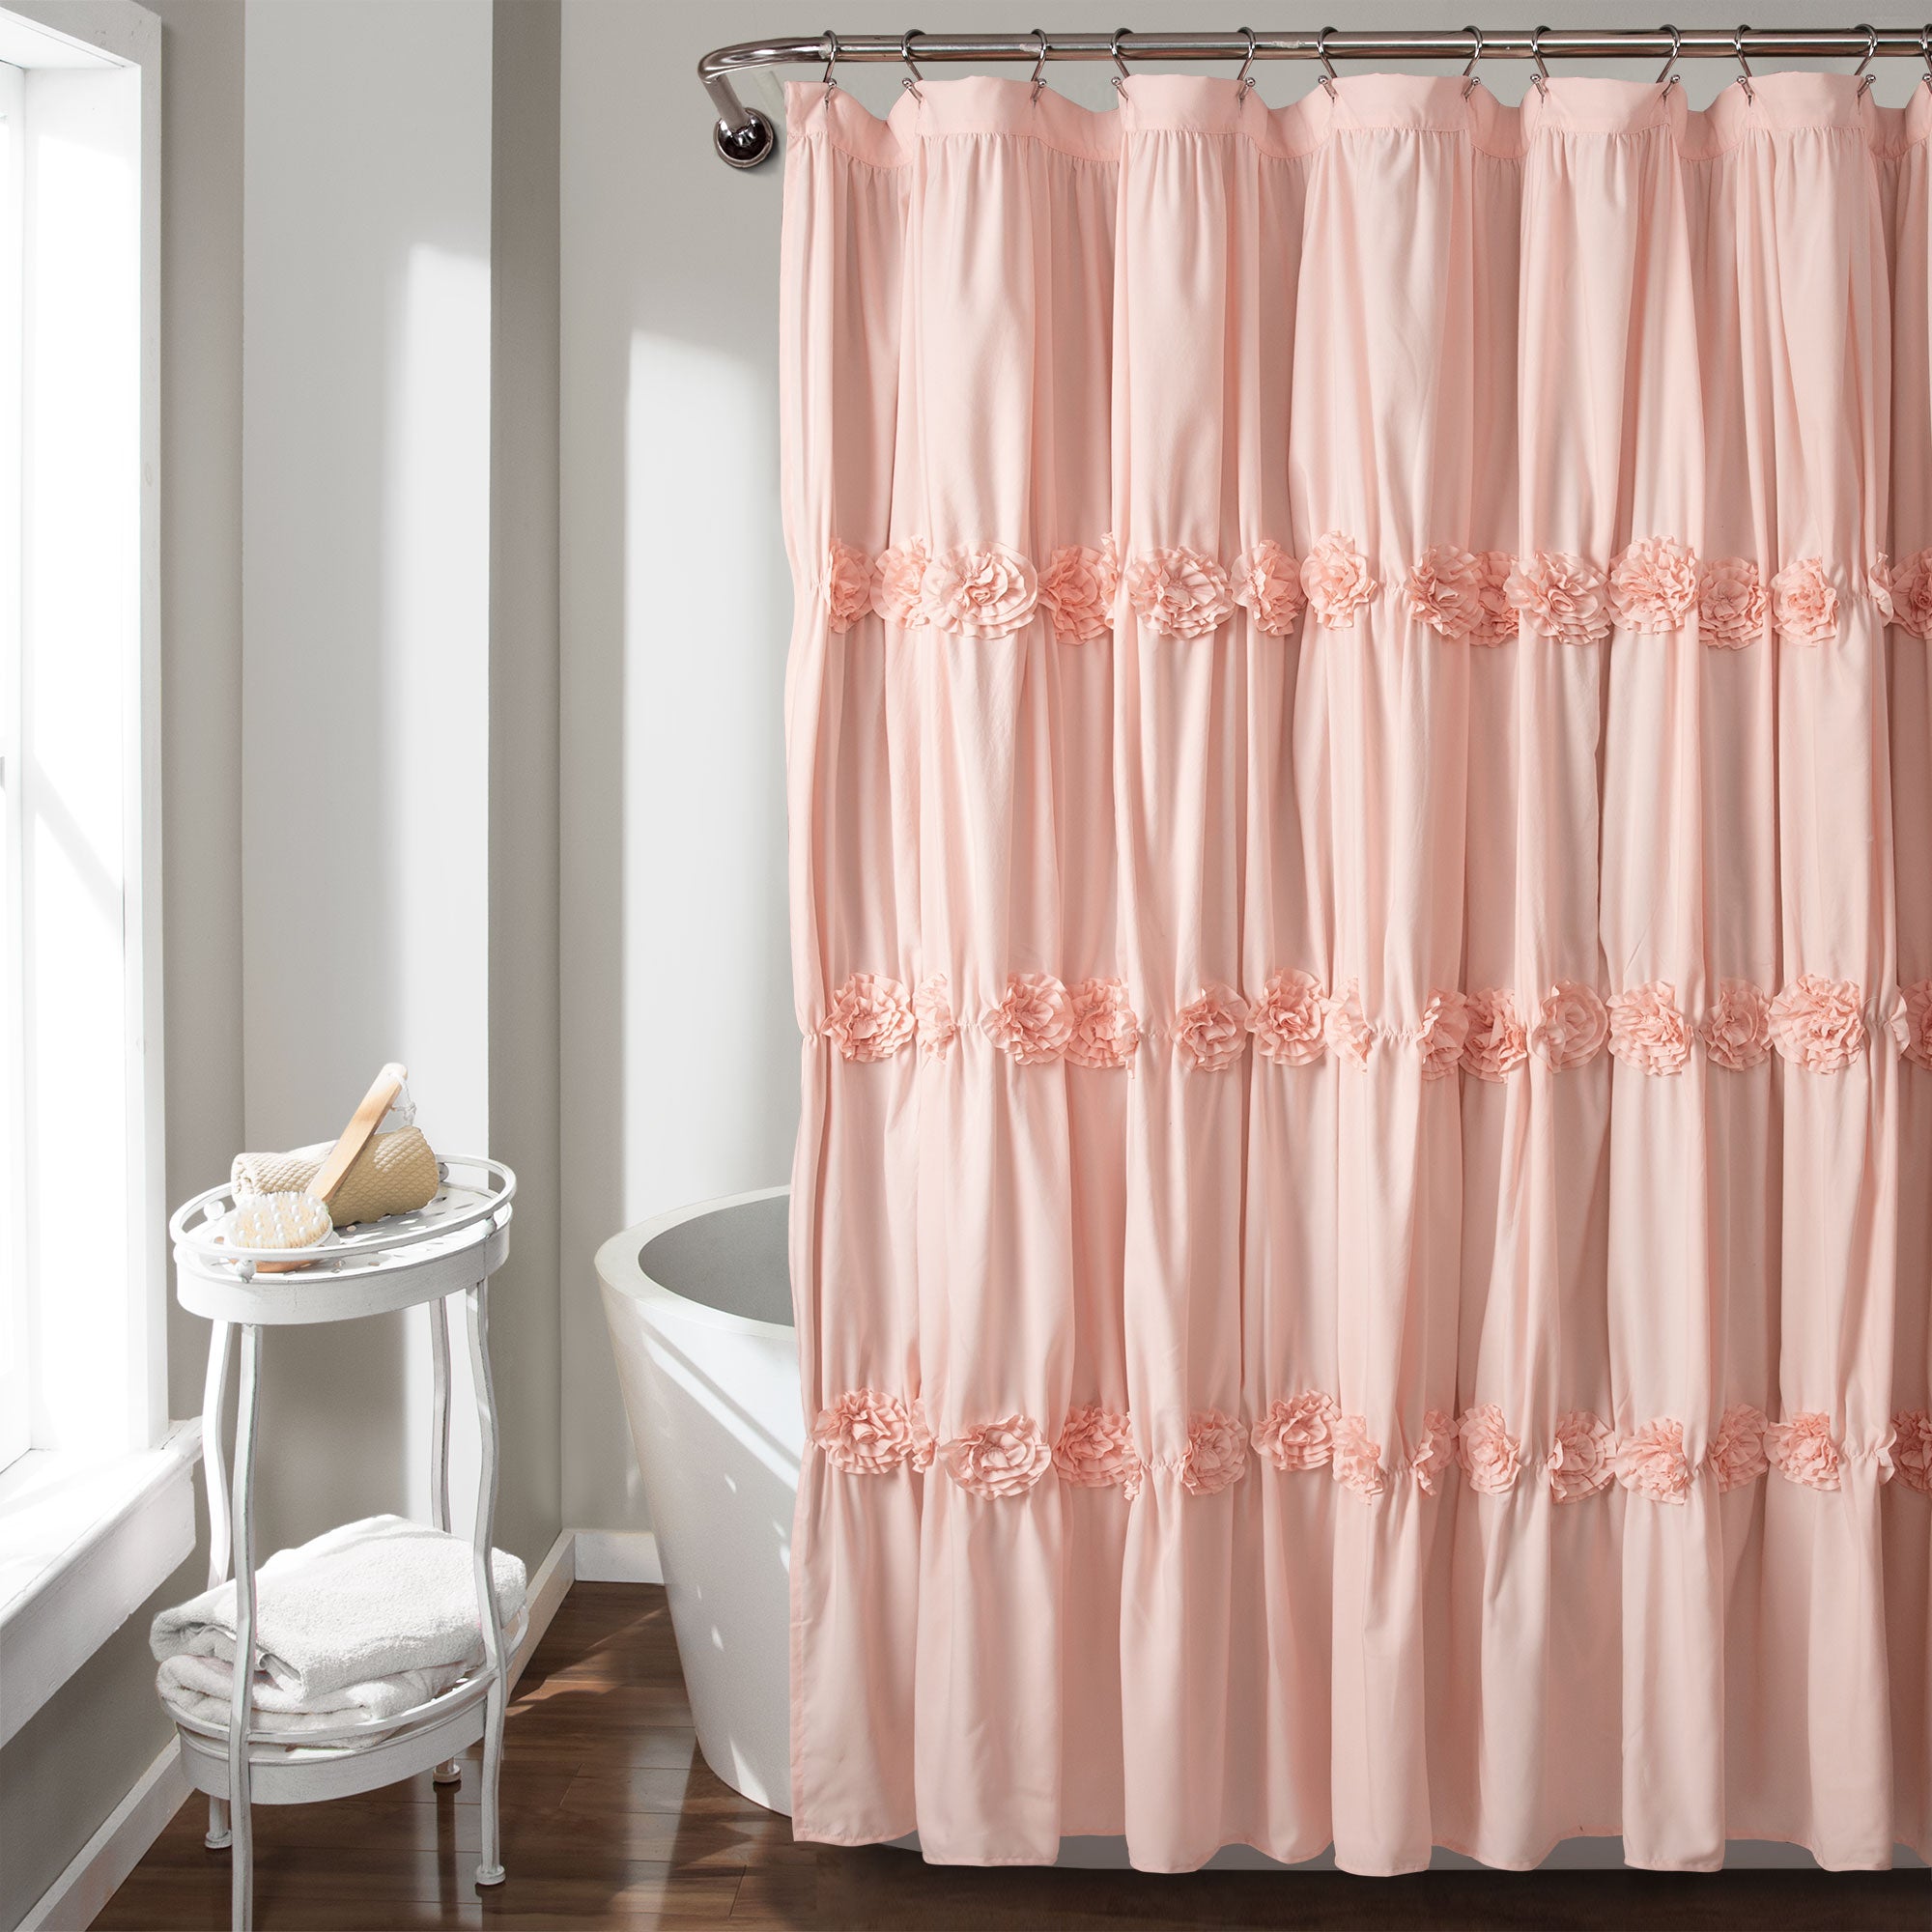 Darla Ivory Shower Curtain 72x72 Rustic Tuesday